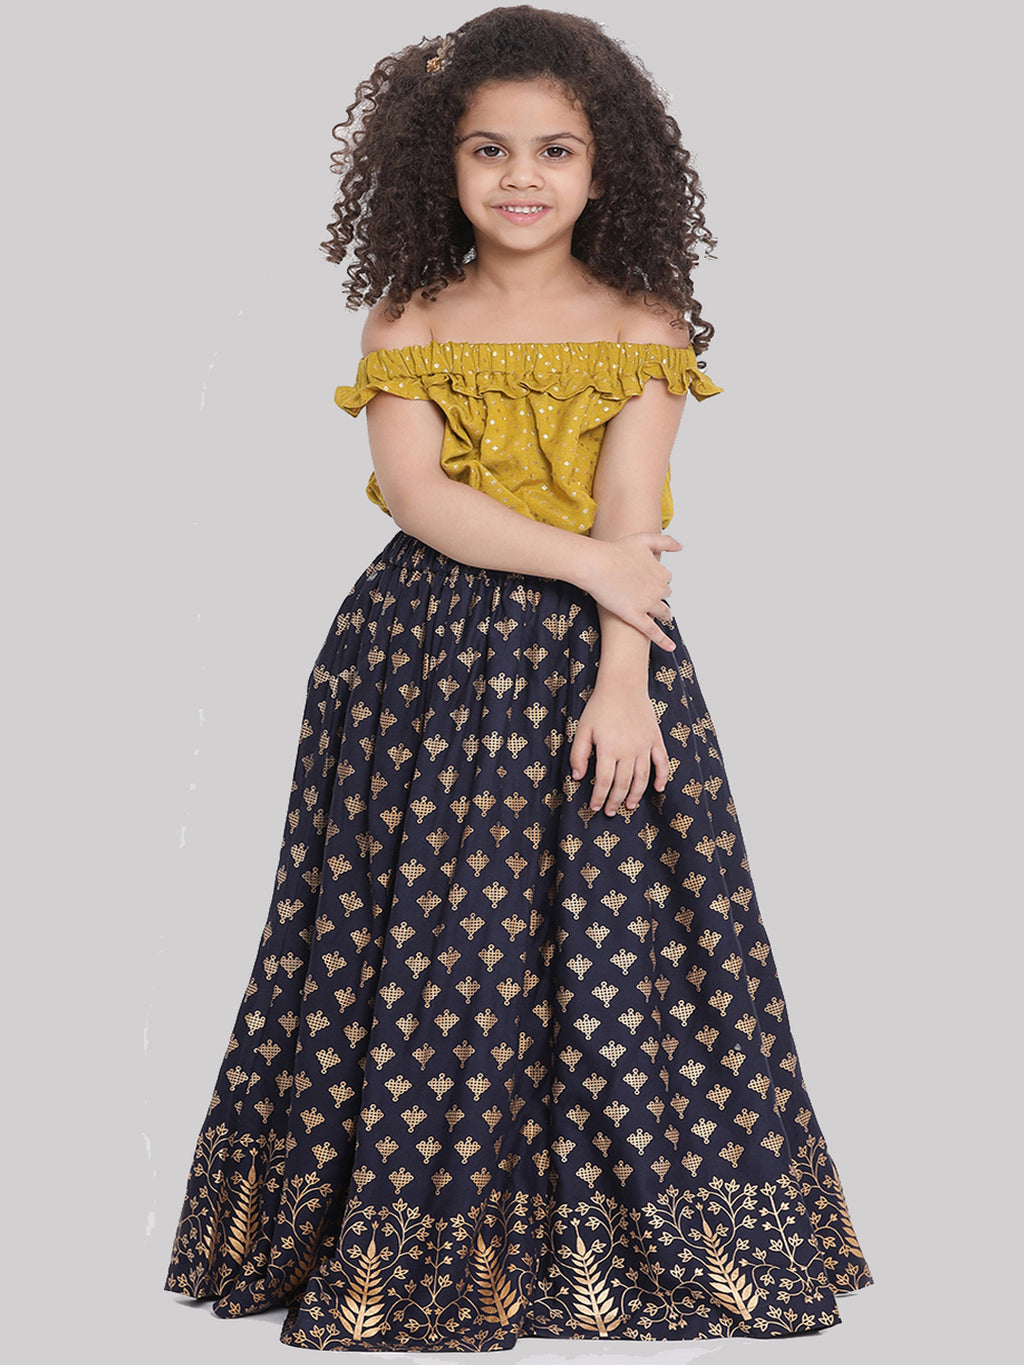 ethnic wear for 2 year girl